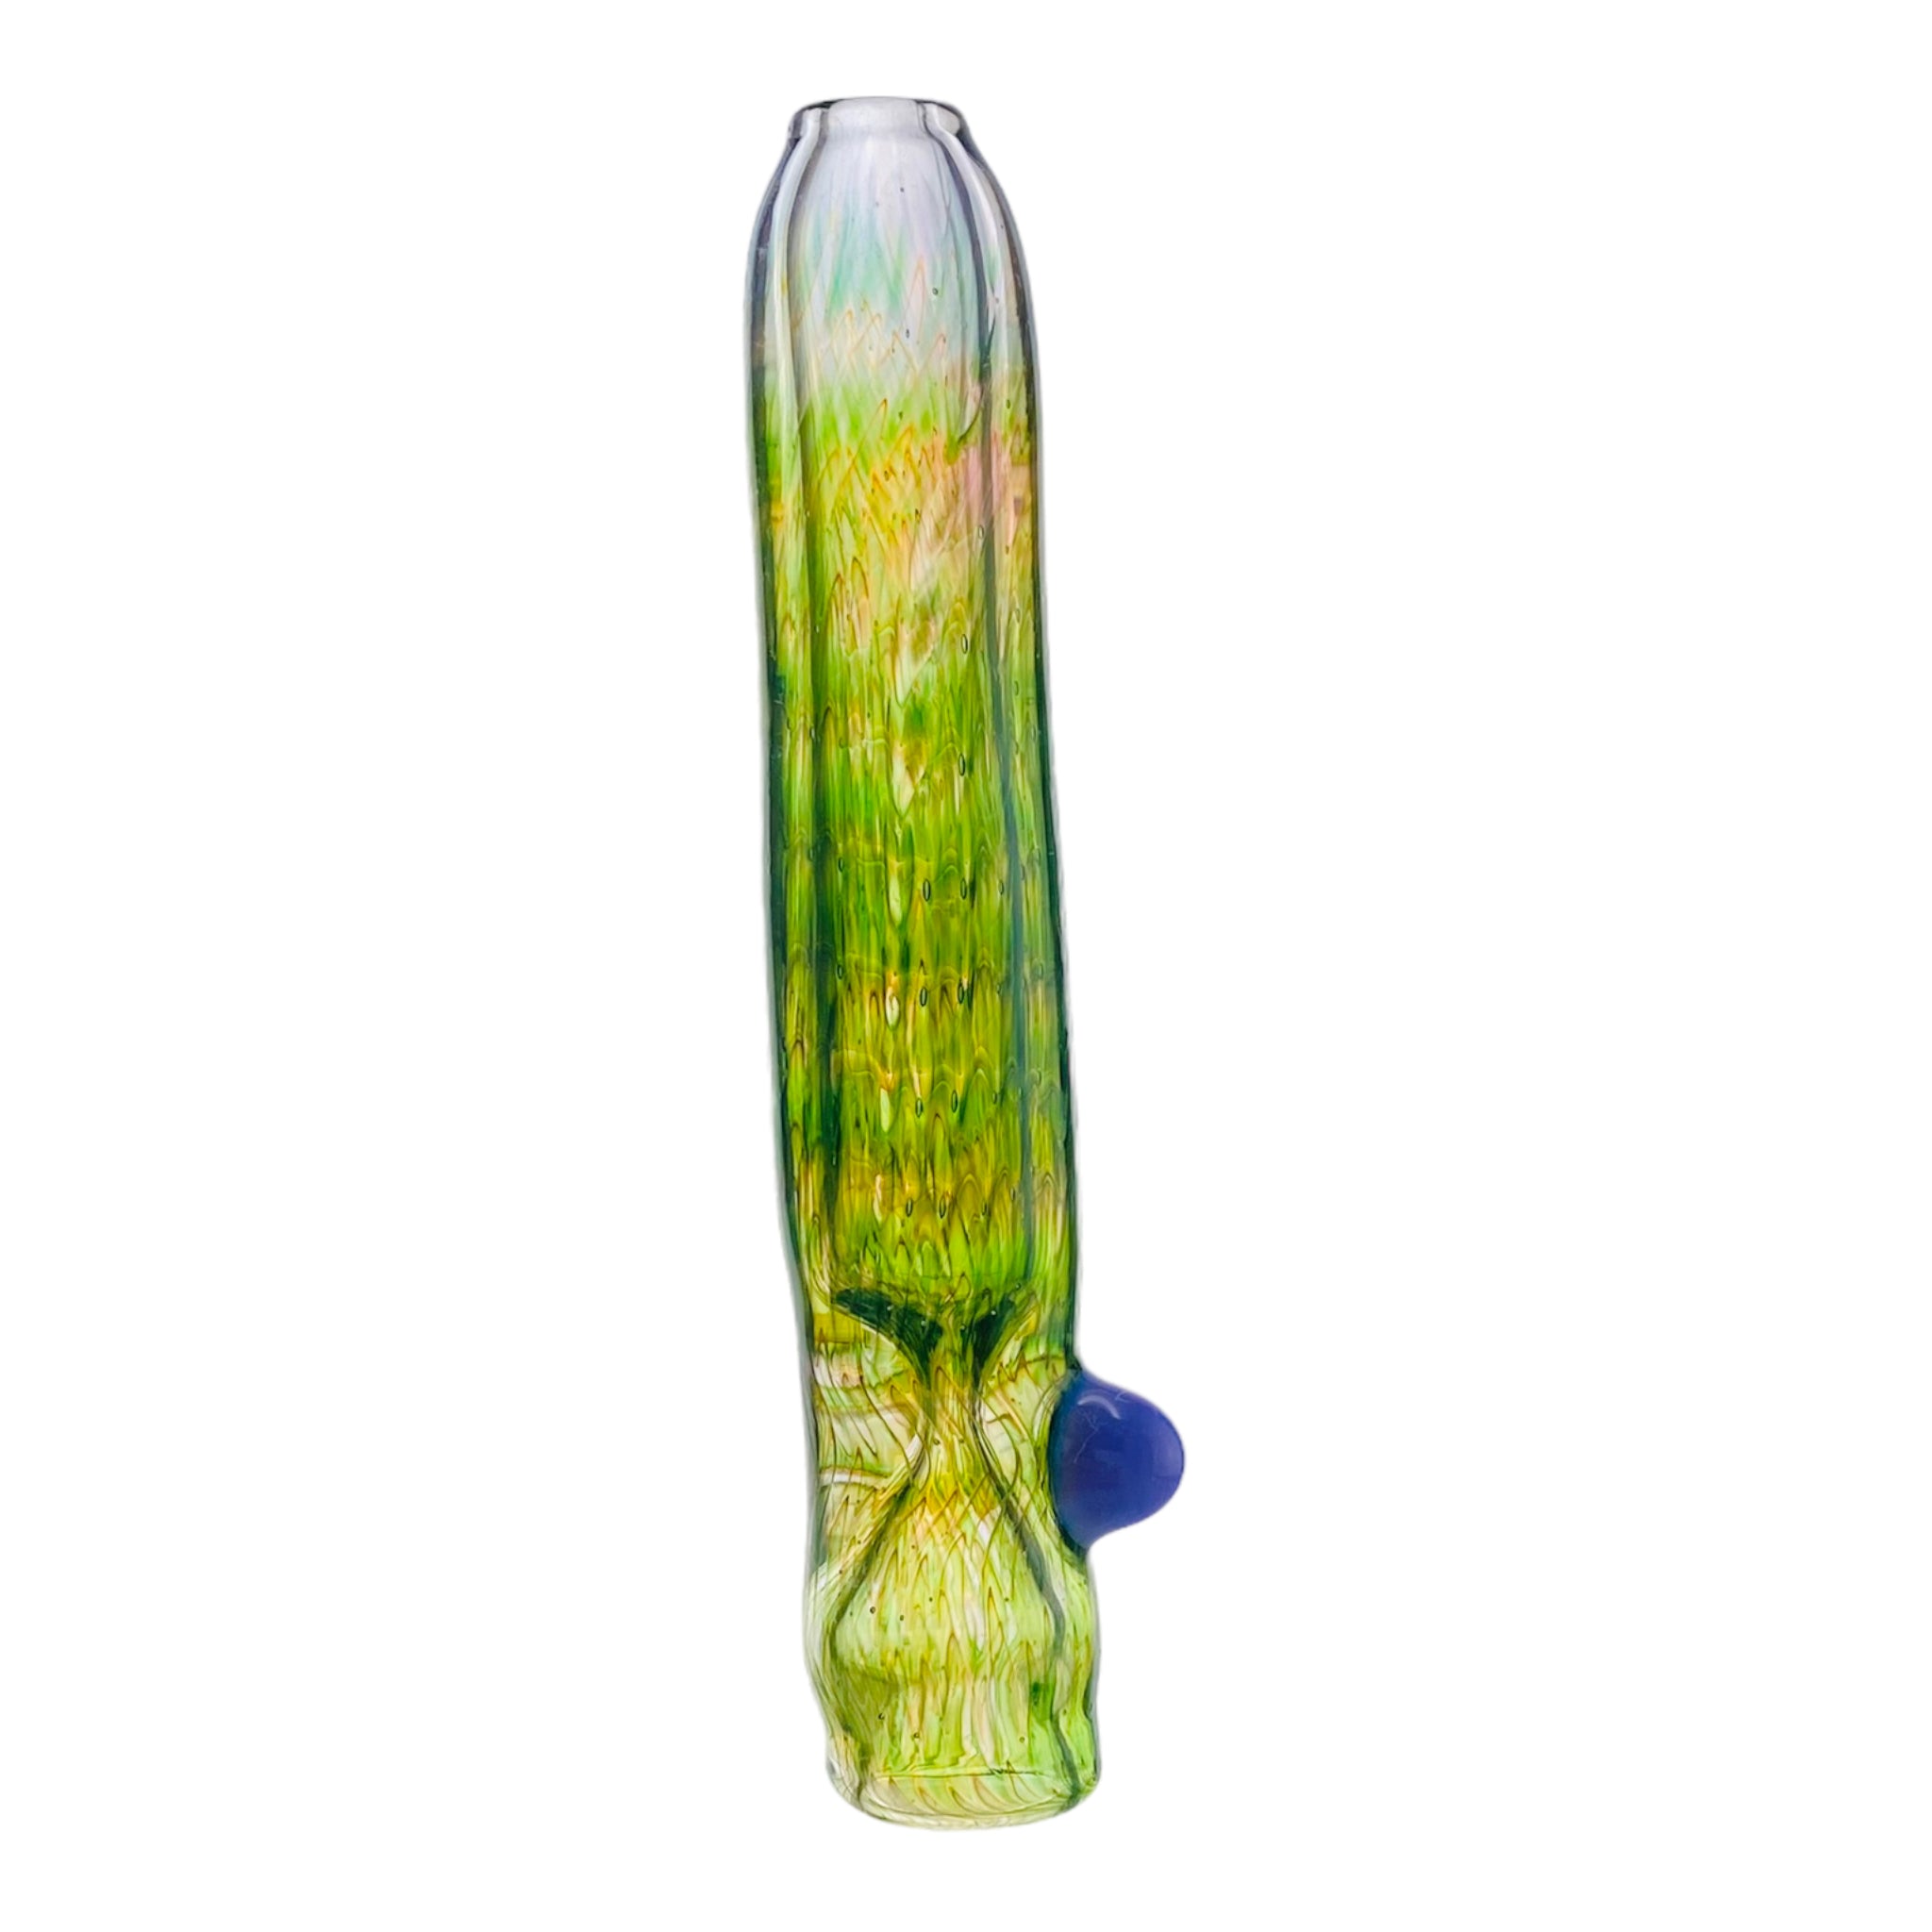 Glass Chillum Pipe - Psychedelic Green Fade With Air Trap Bubbles